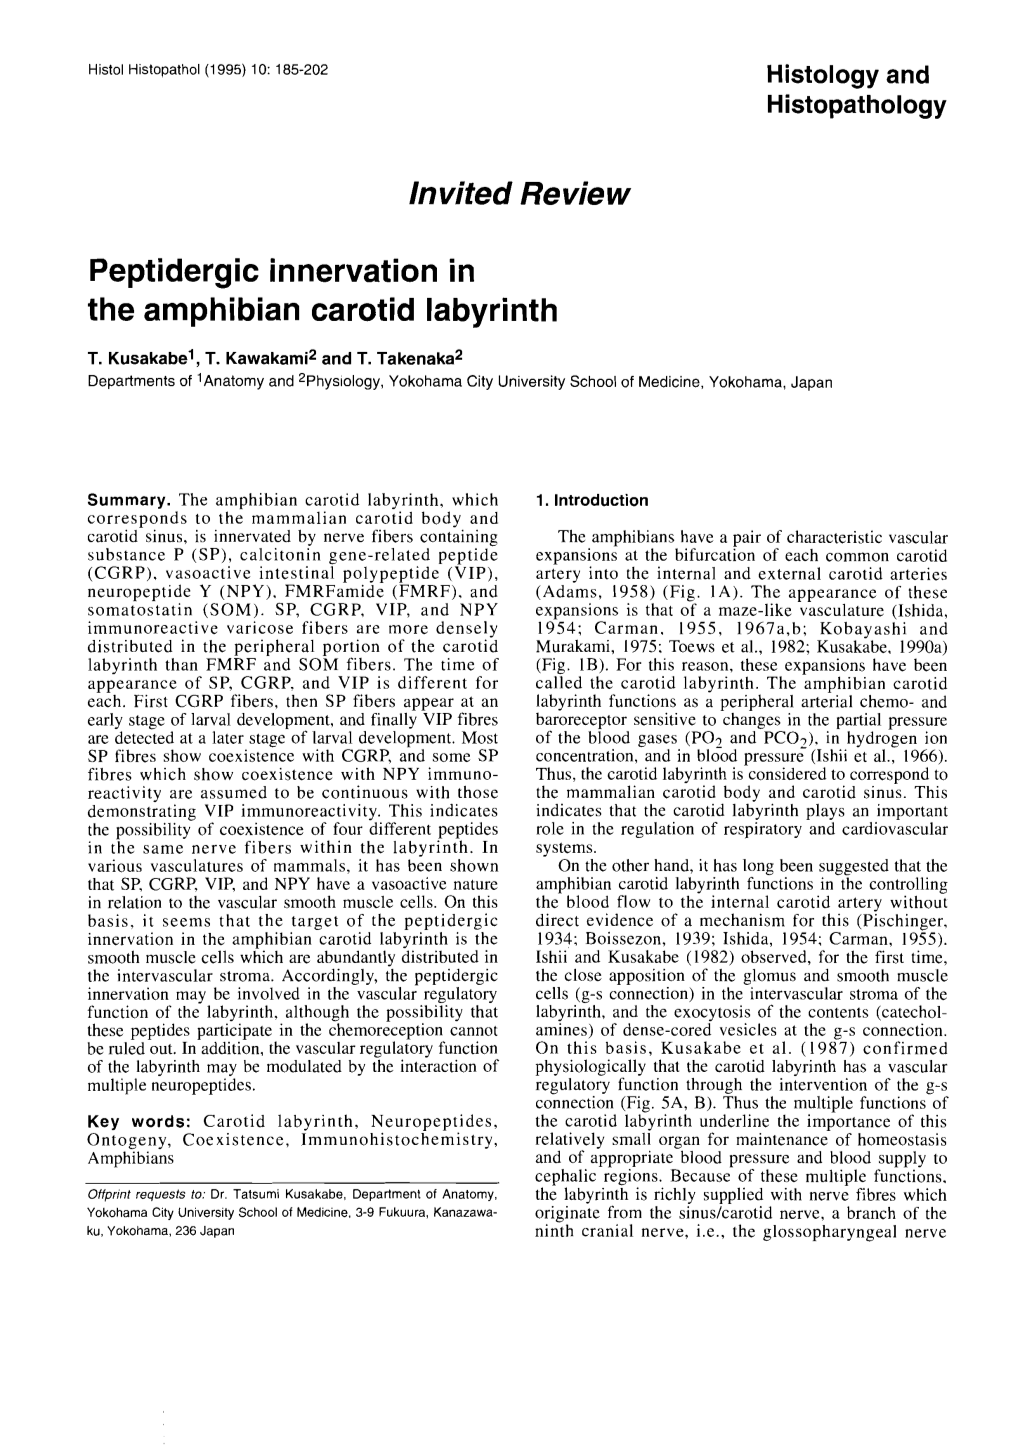 Peptidergic Innervation in the Amphibian Carotid Labyrinth